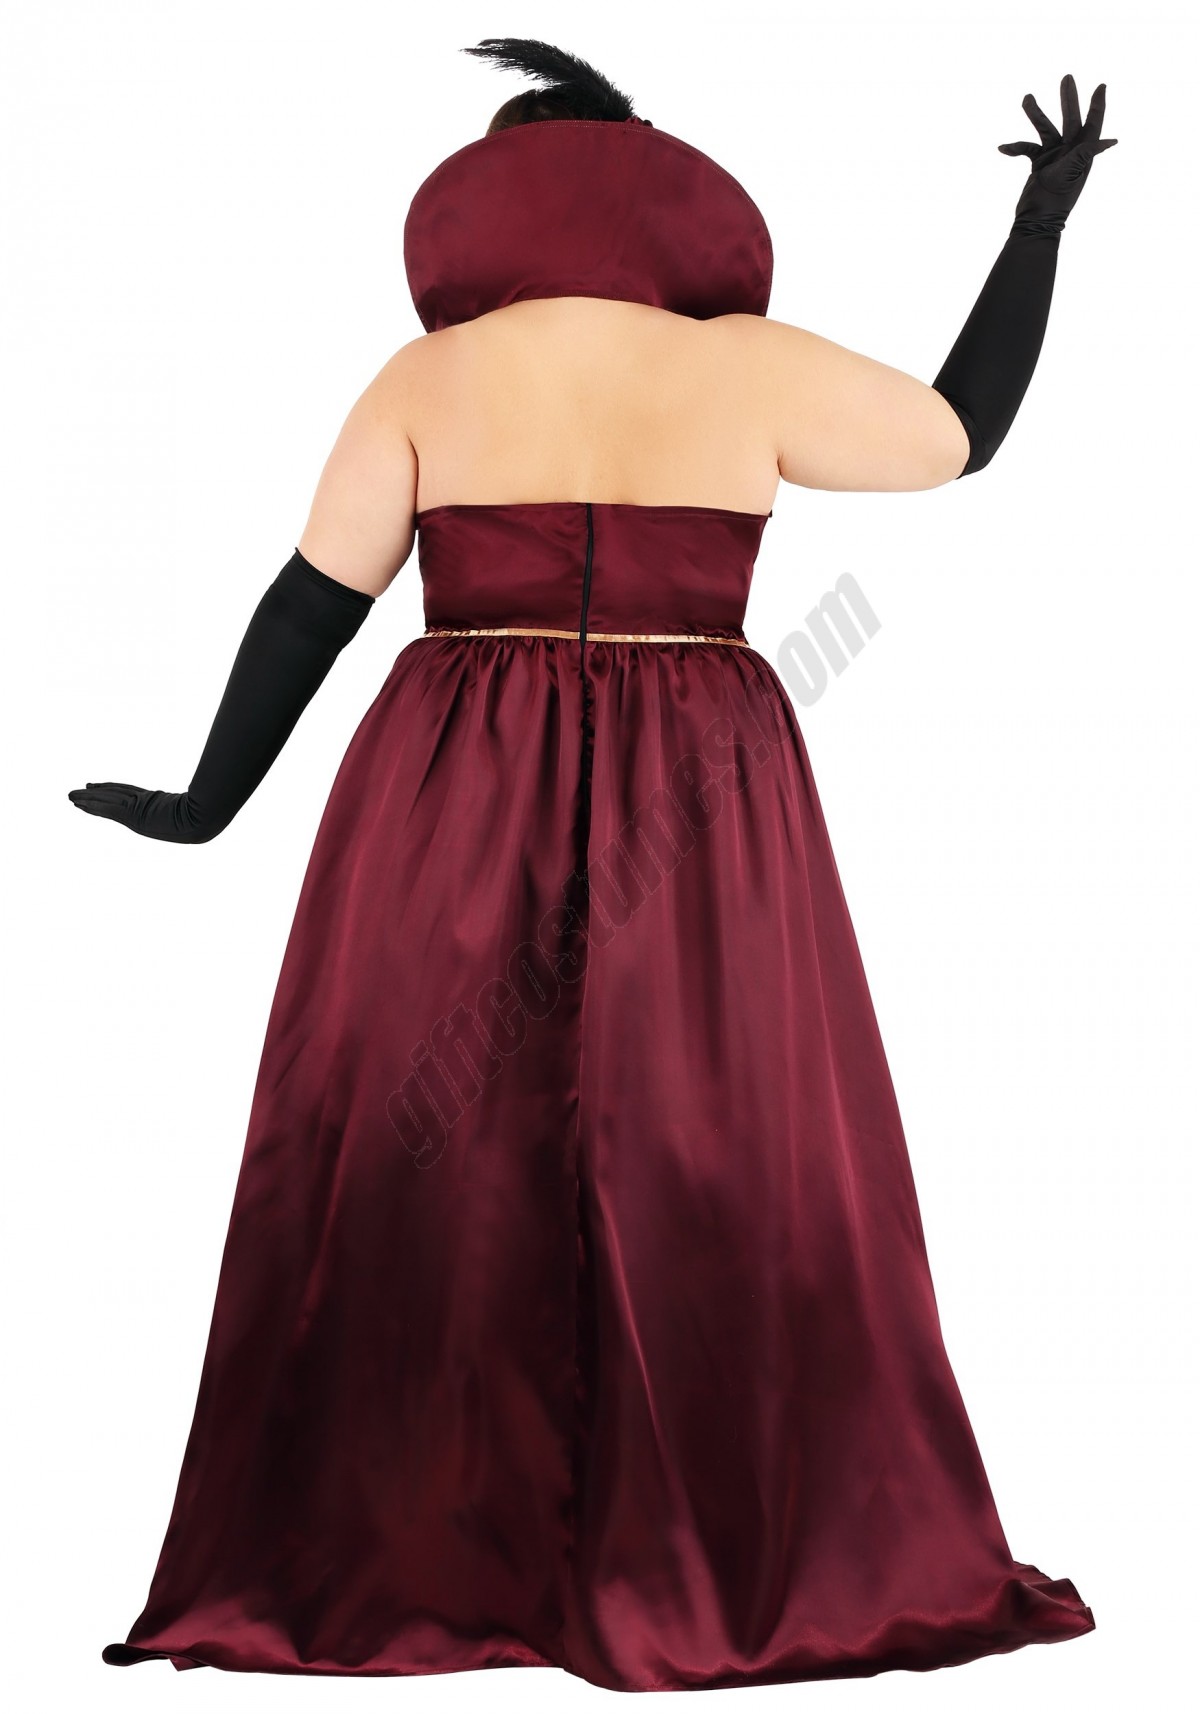 Plus Size Women's Bearded Lady Circus Costume Promotions - -1